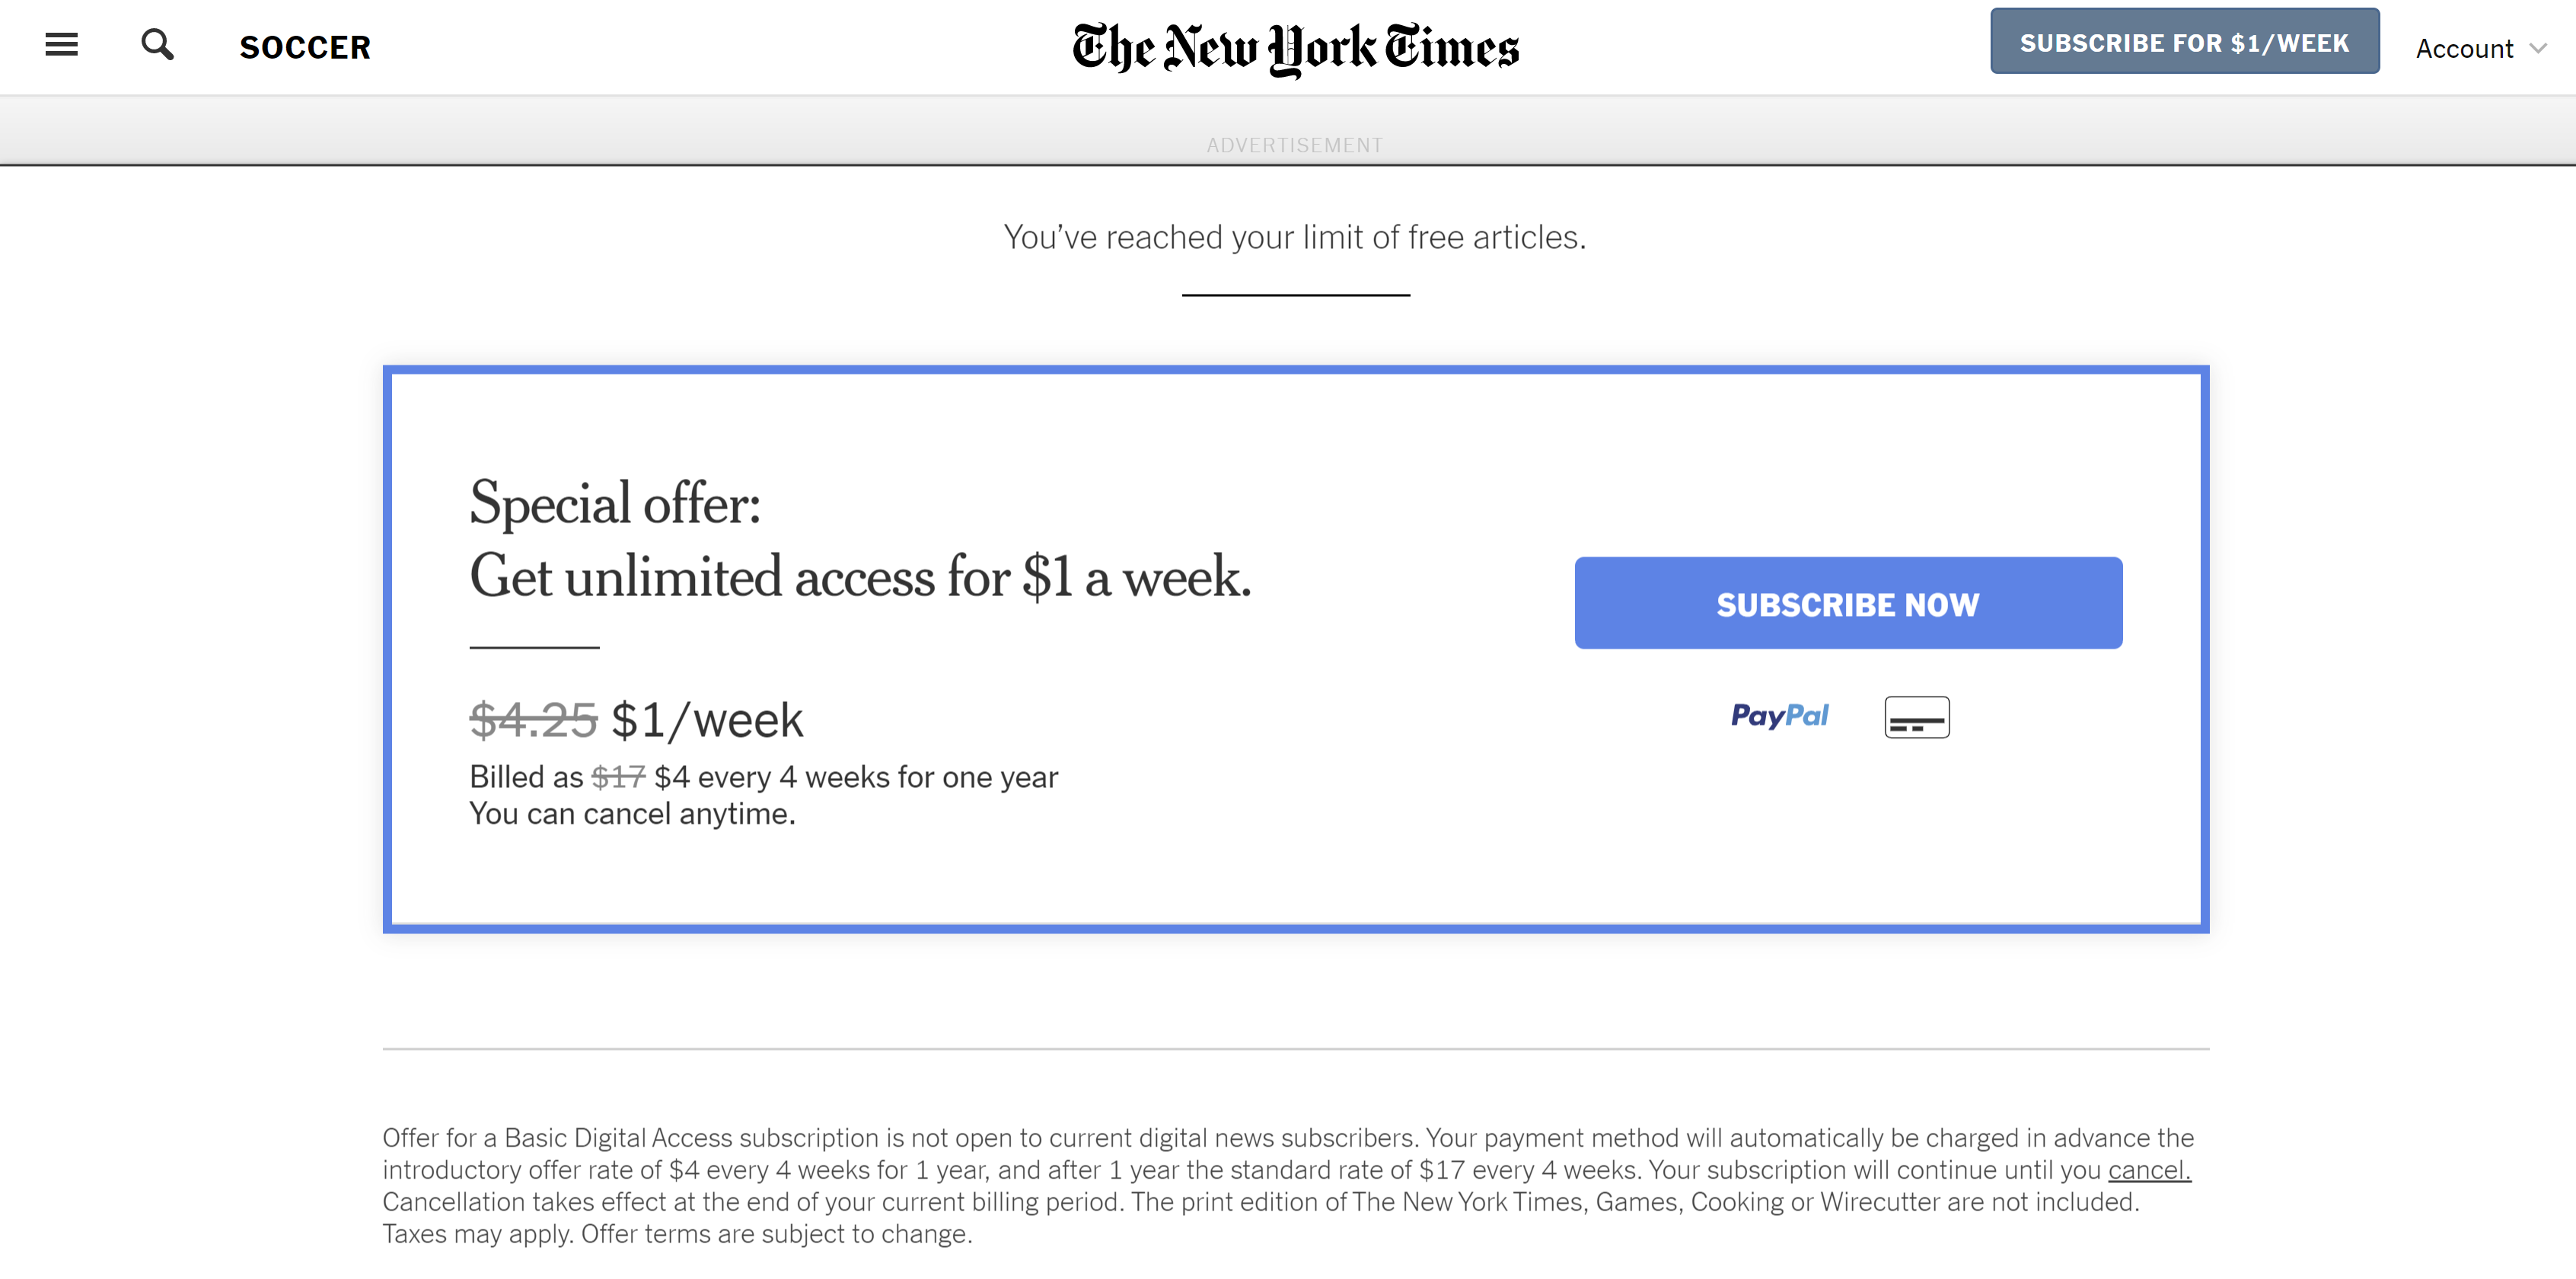 Fig: Article limit screen from the The New York Times (a form of step-up authentication)